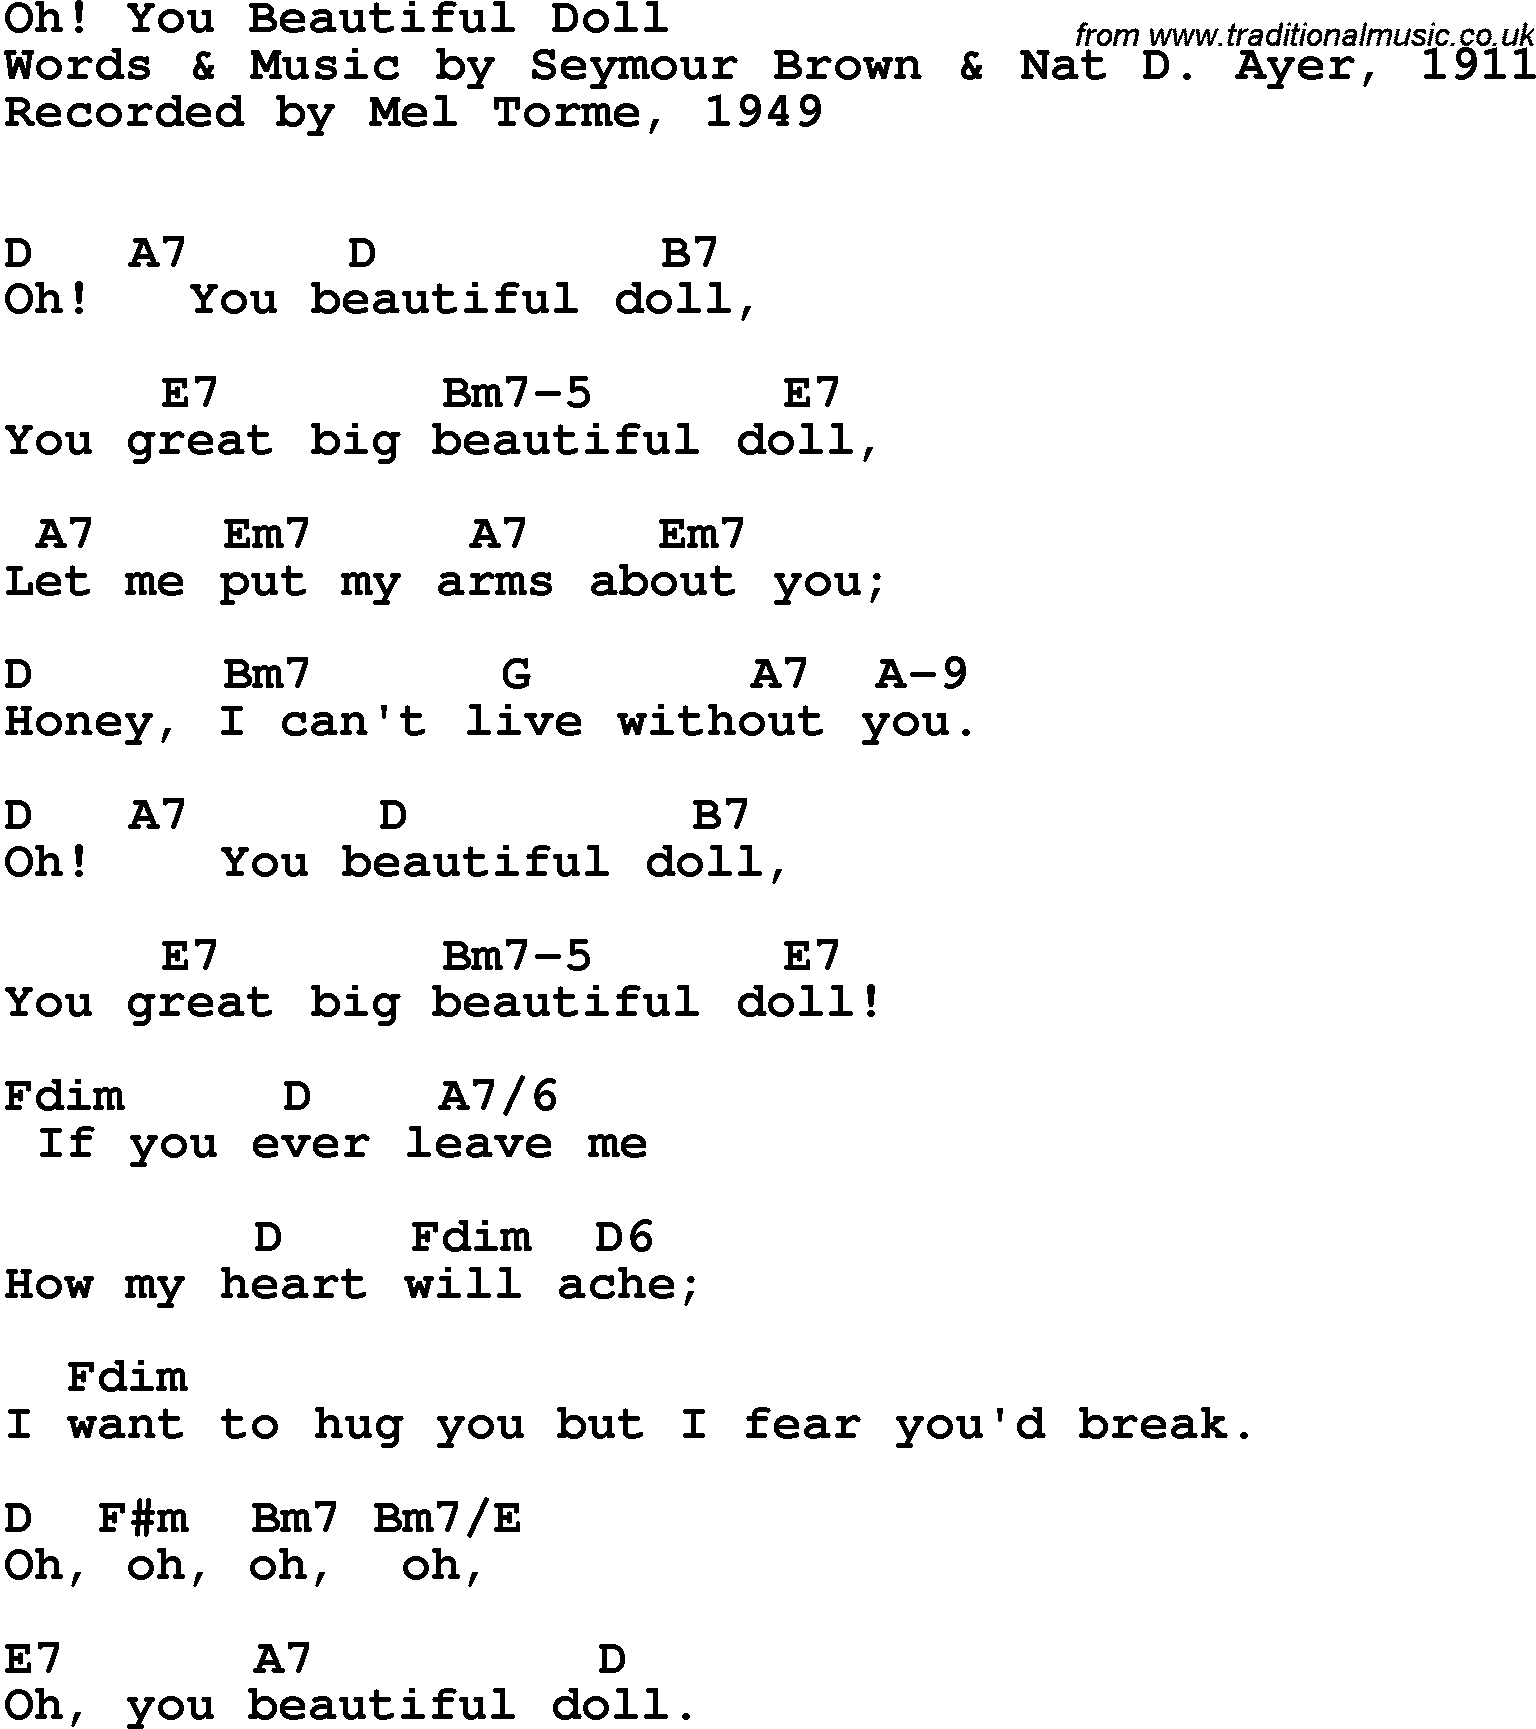 Song Lyrics with guitar chords for Oh! You Beautiful Doll - Mel Torme, 1949